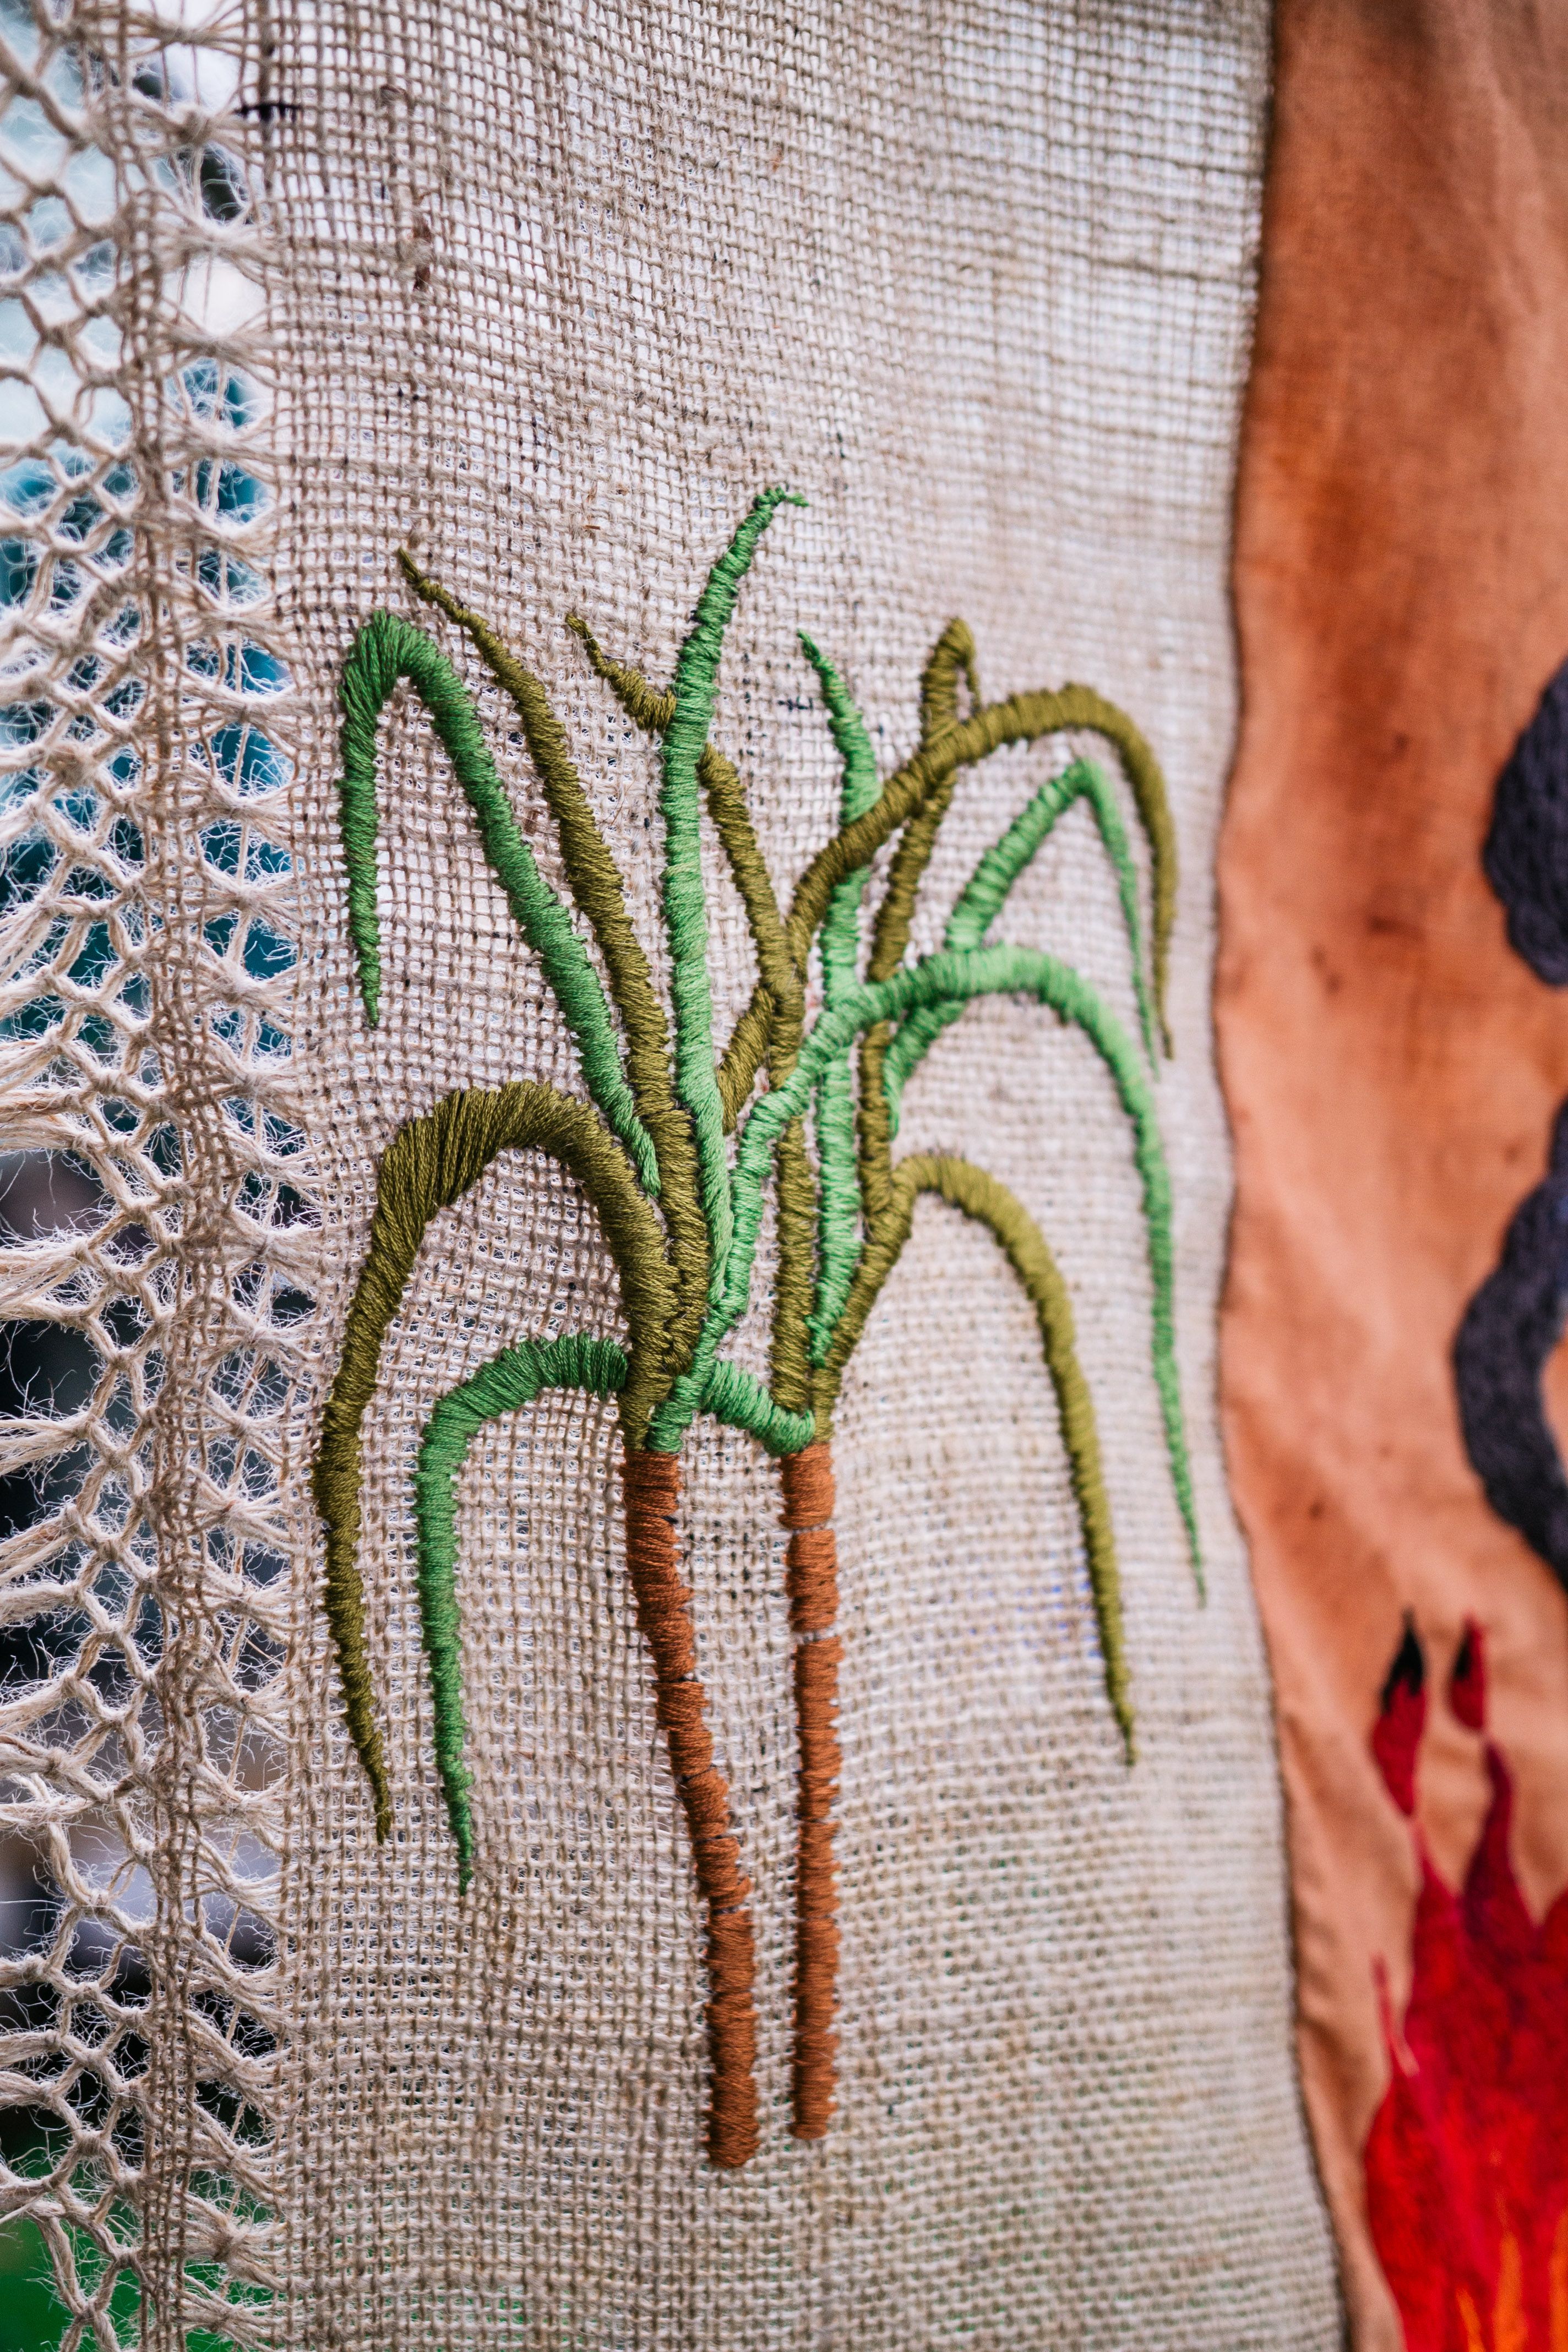 Quishile Charan, Burning Ganna Khet, 2021, cotton, embroidery thread, hessian sacks, natural dye: avocados, 153cm by 152cm. Close up of embroidery. Image taken by: Matavai Taulangau.